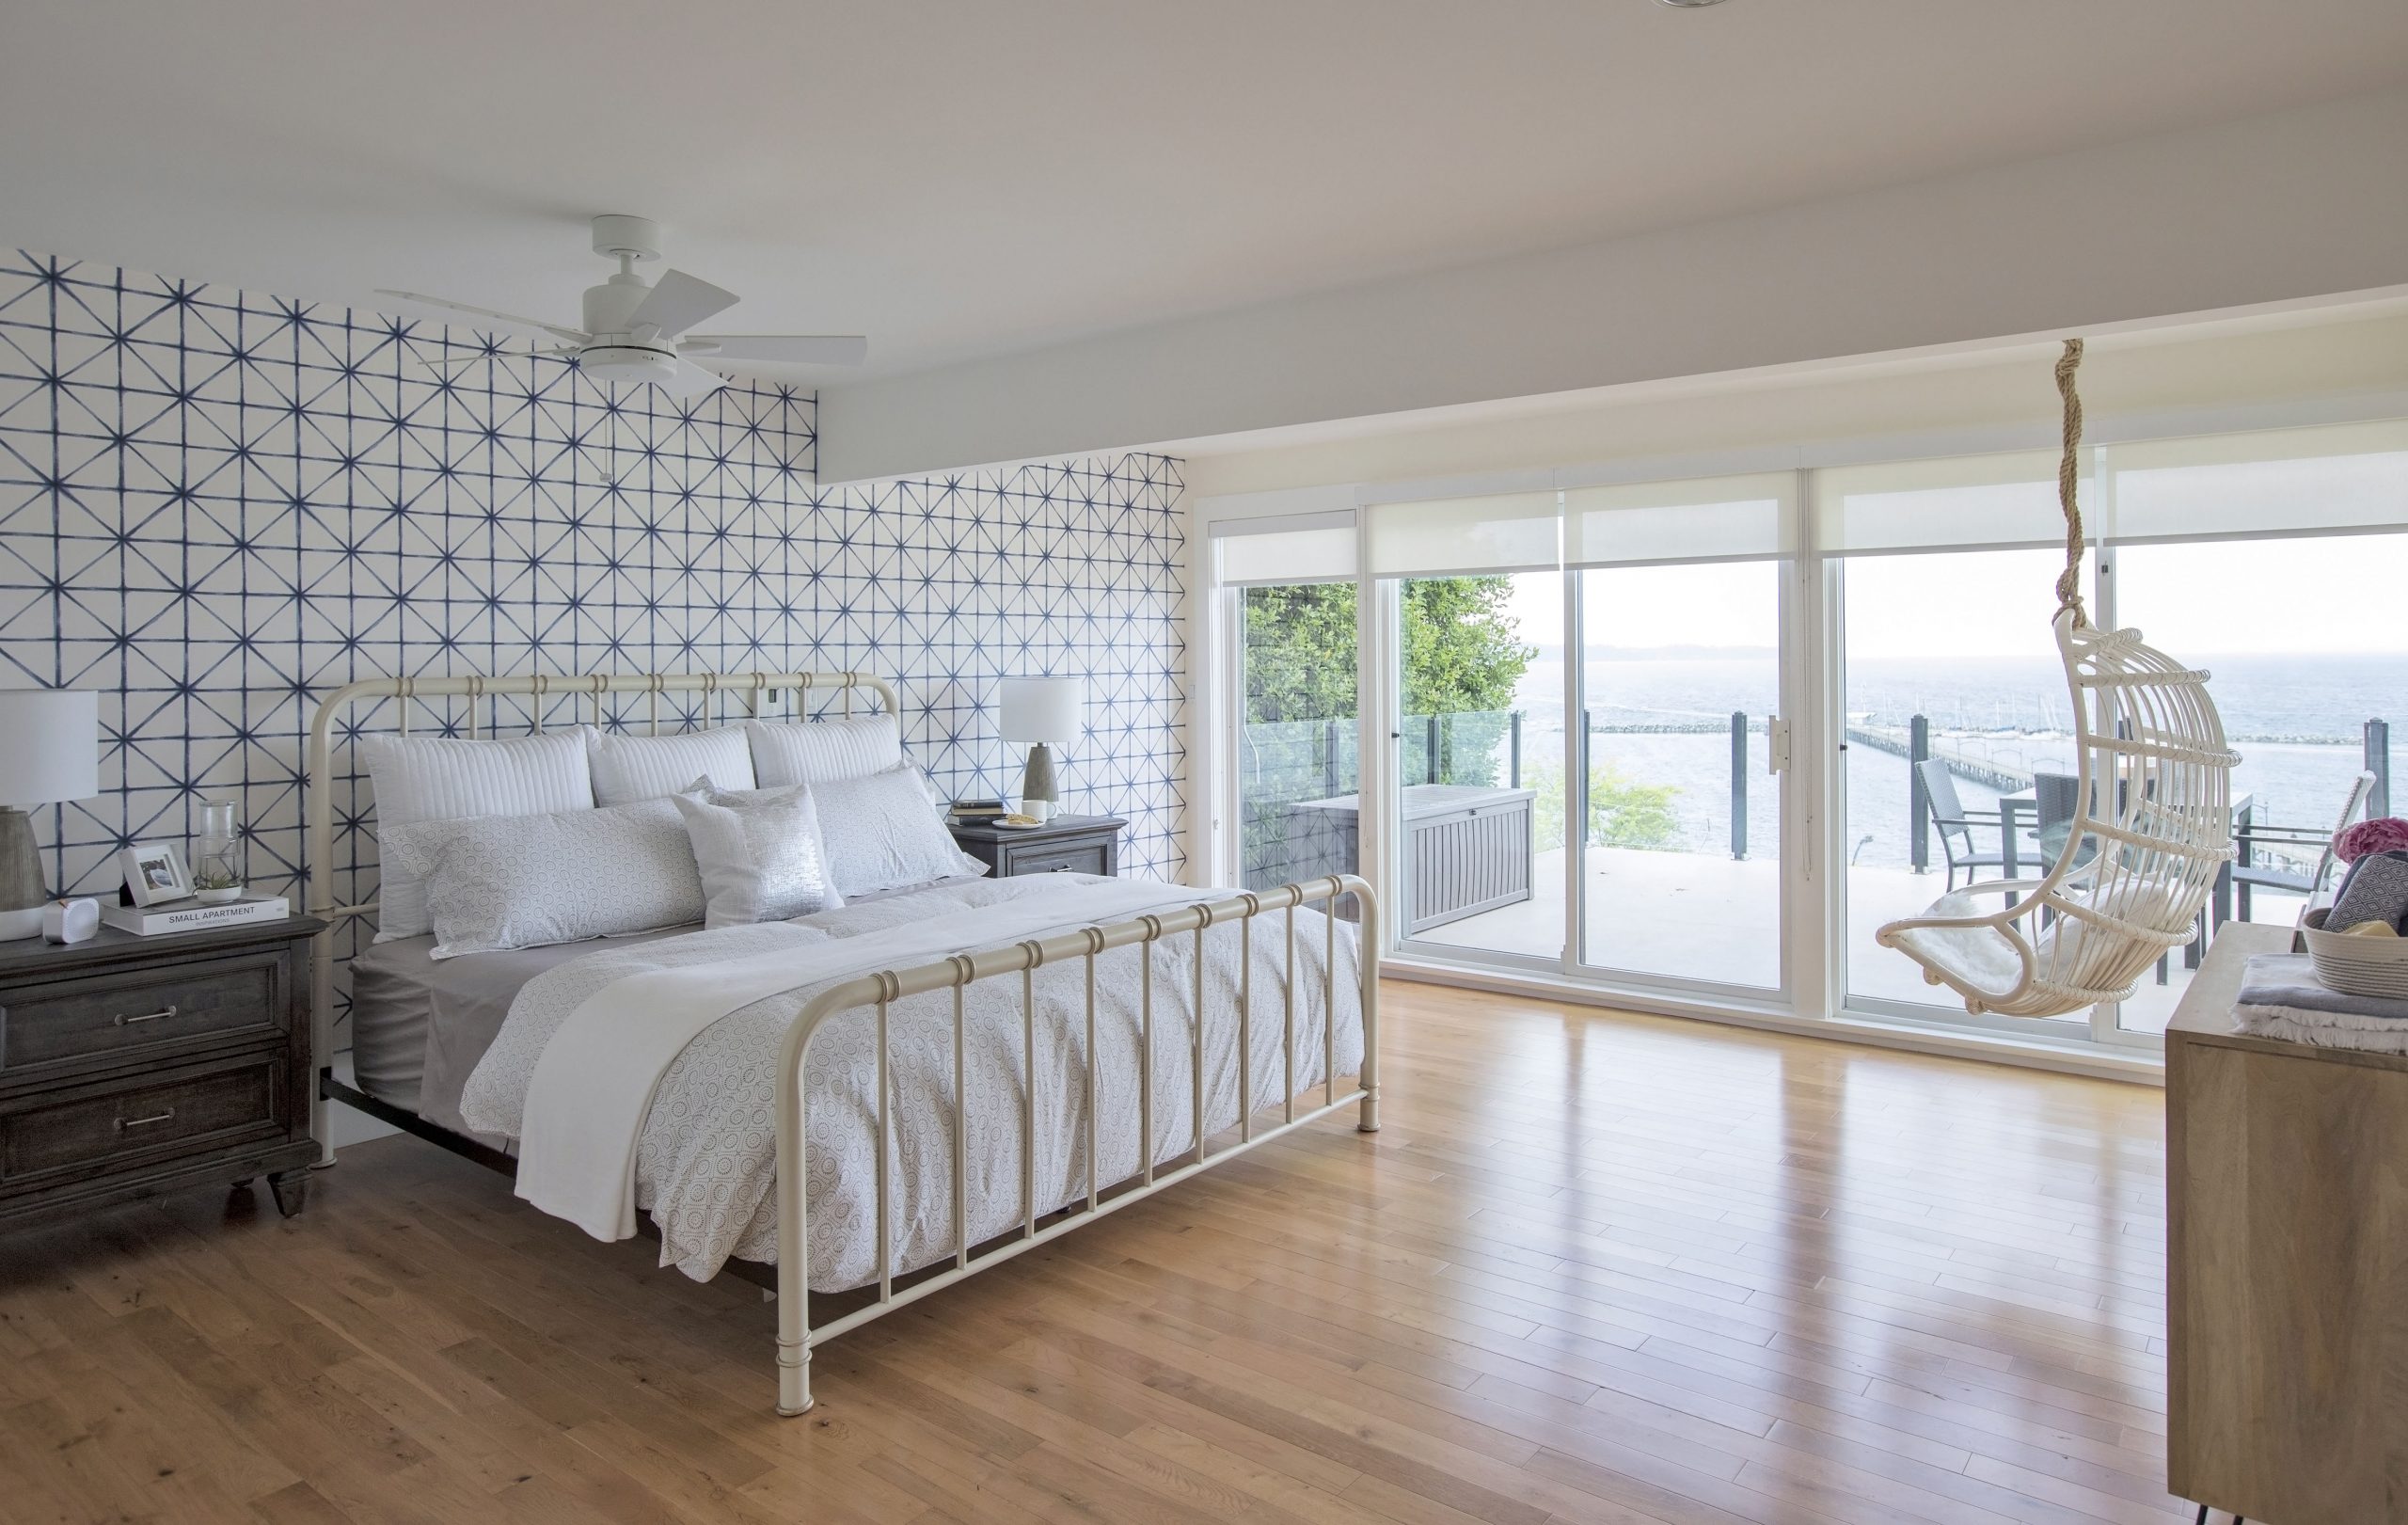 A master bedroom with a spectacular sea view enjoyed from bed.